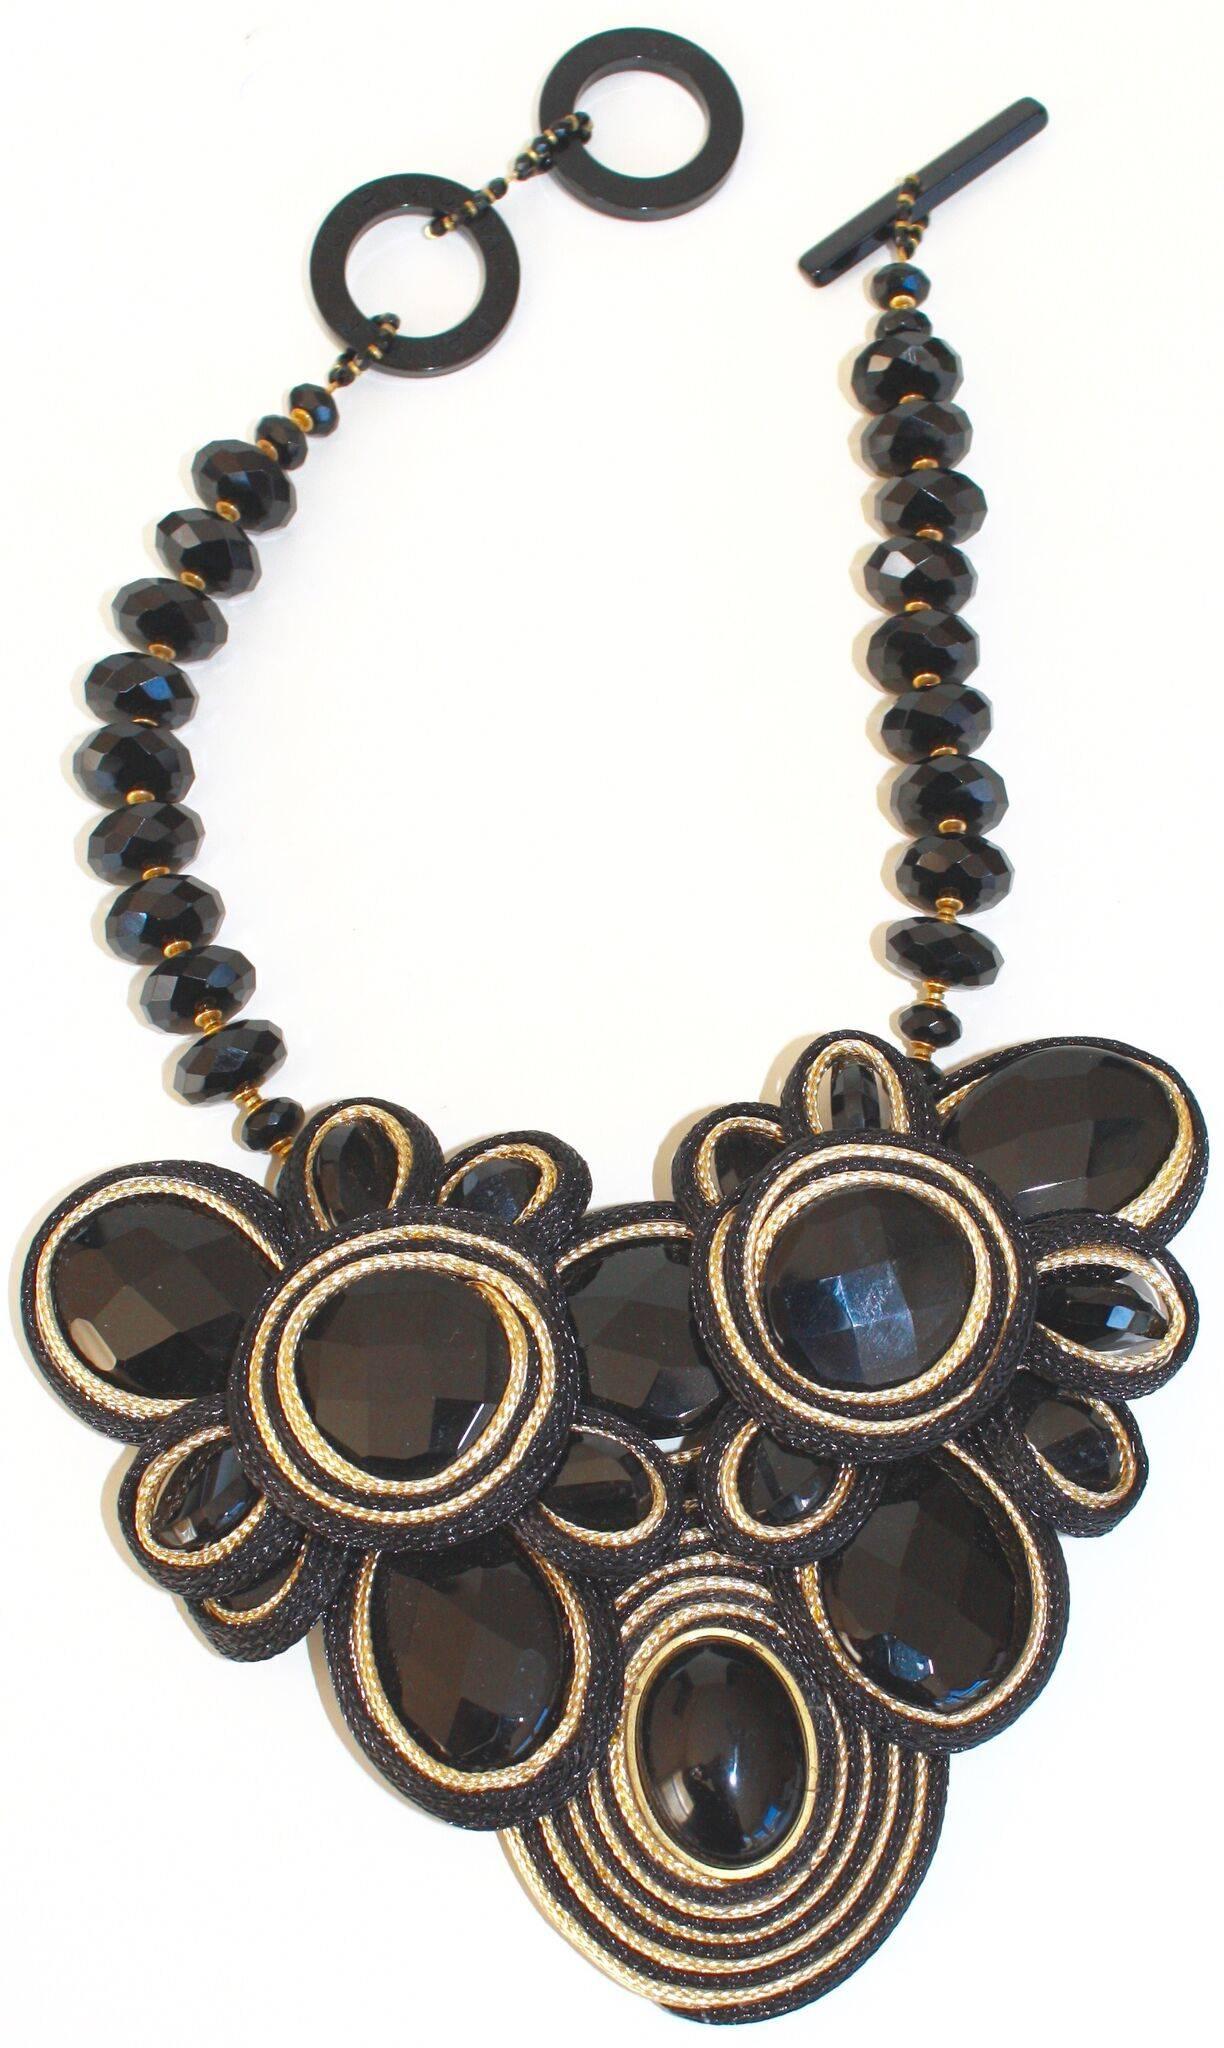 Magnificent and unique statement necklace made with cording and black onyx from Daniele Cornaggia. 

Necklace is 17